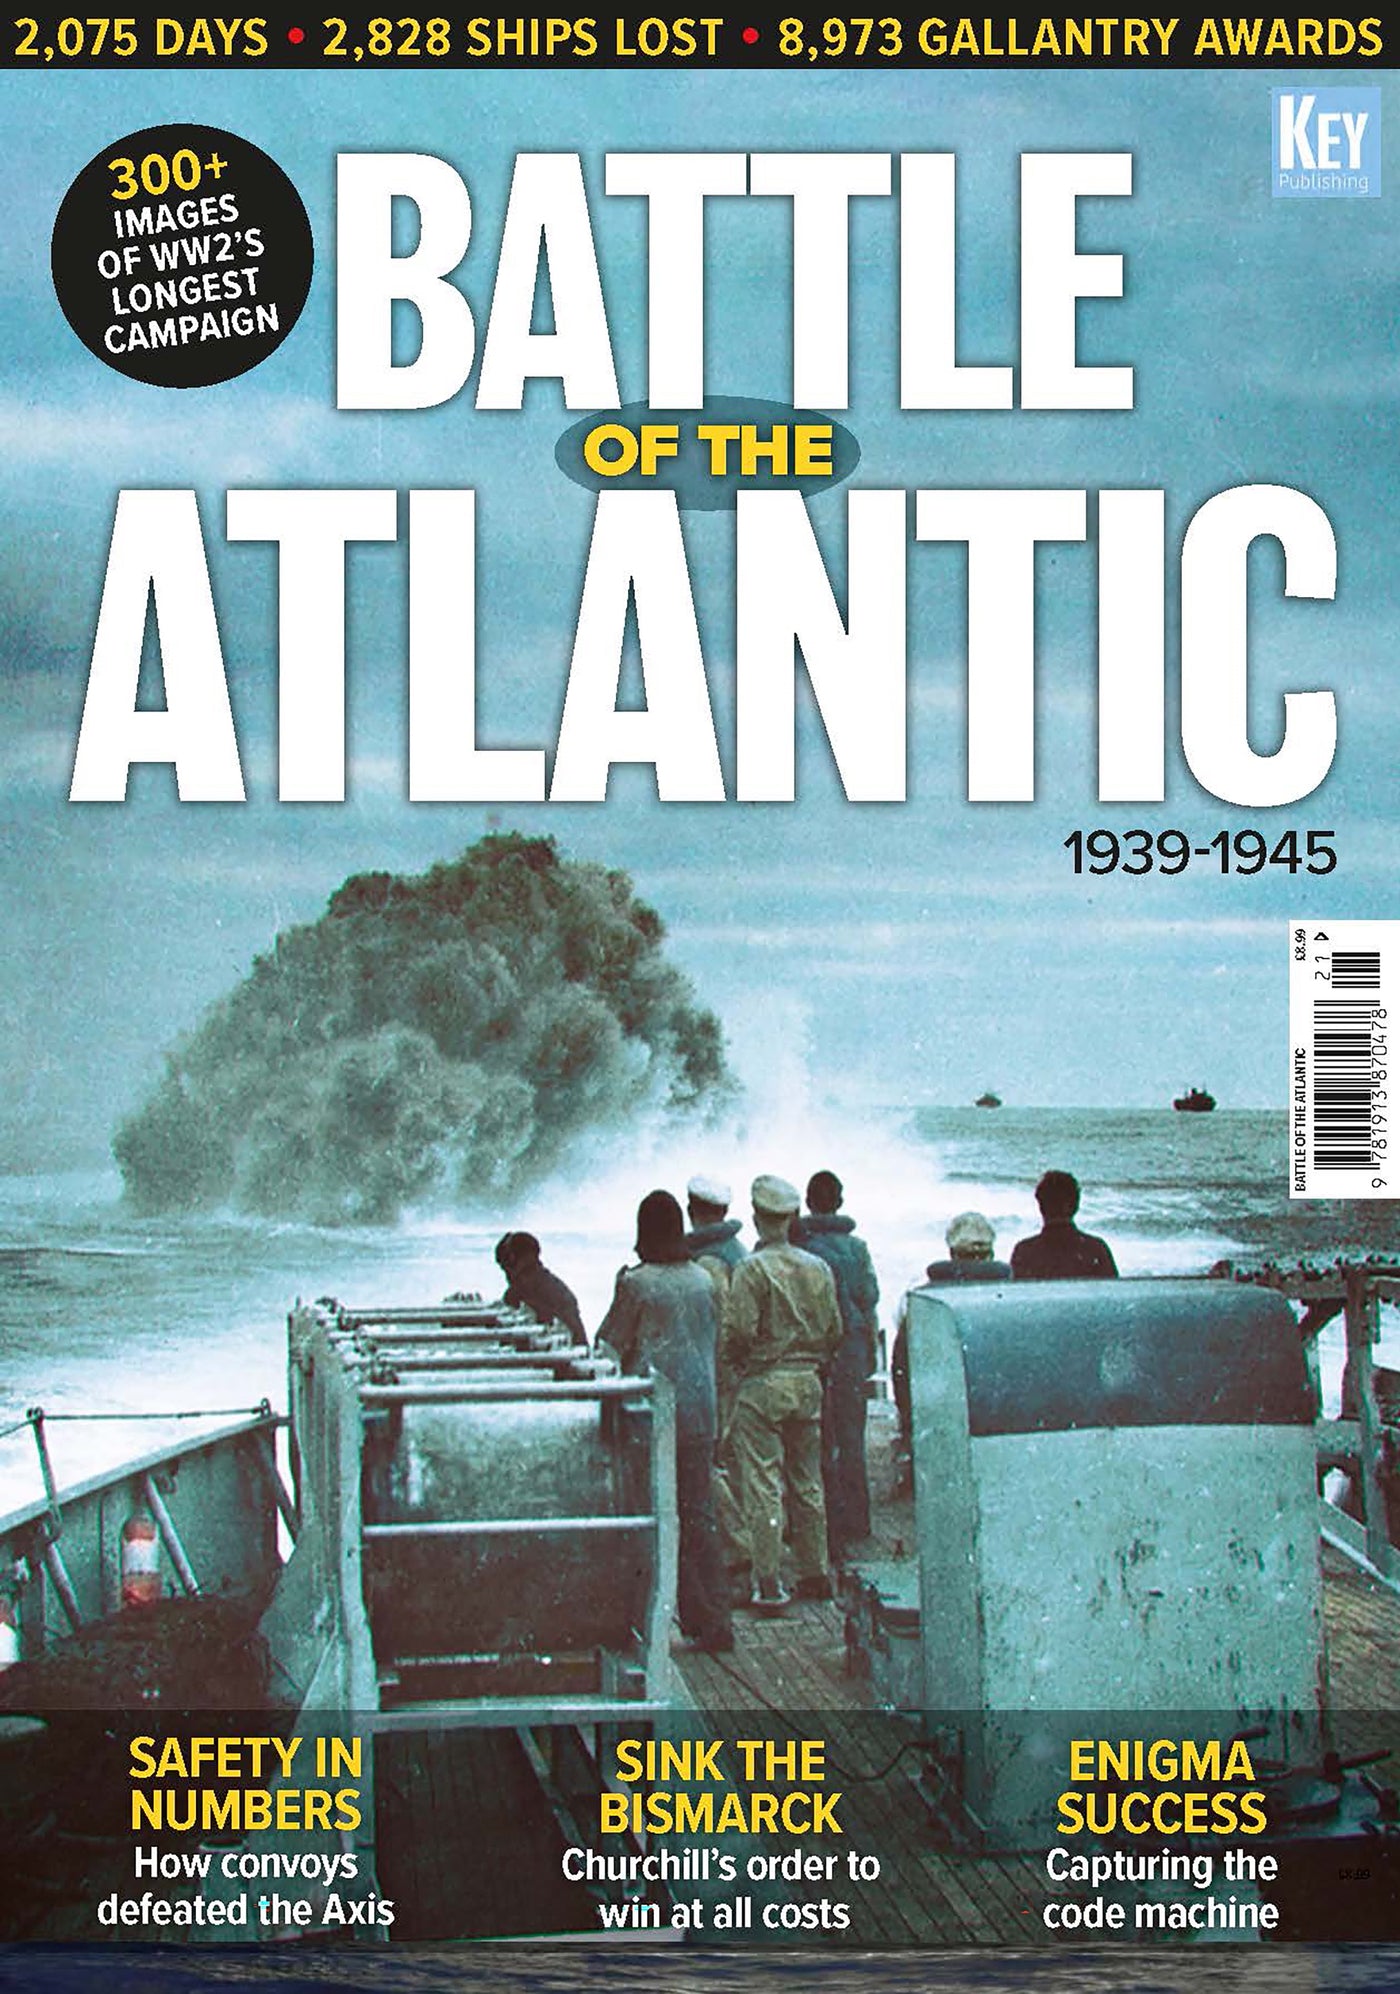 The Battle of the Atlantic